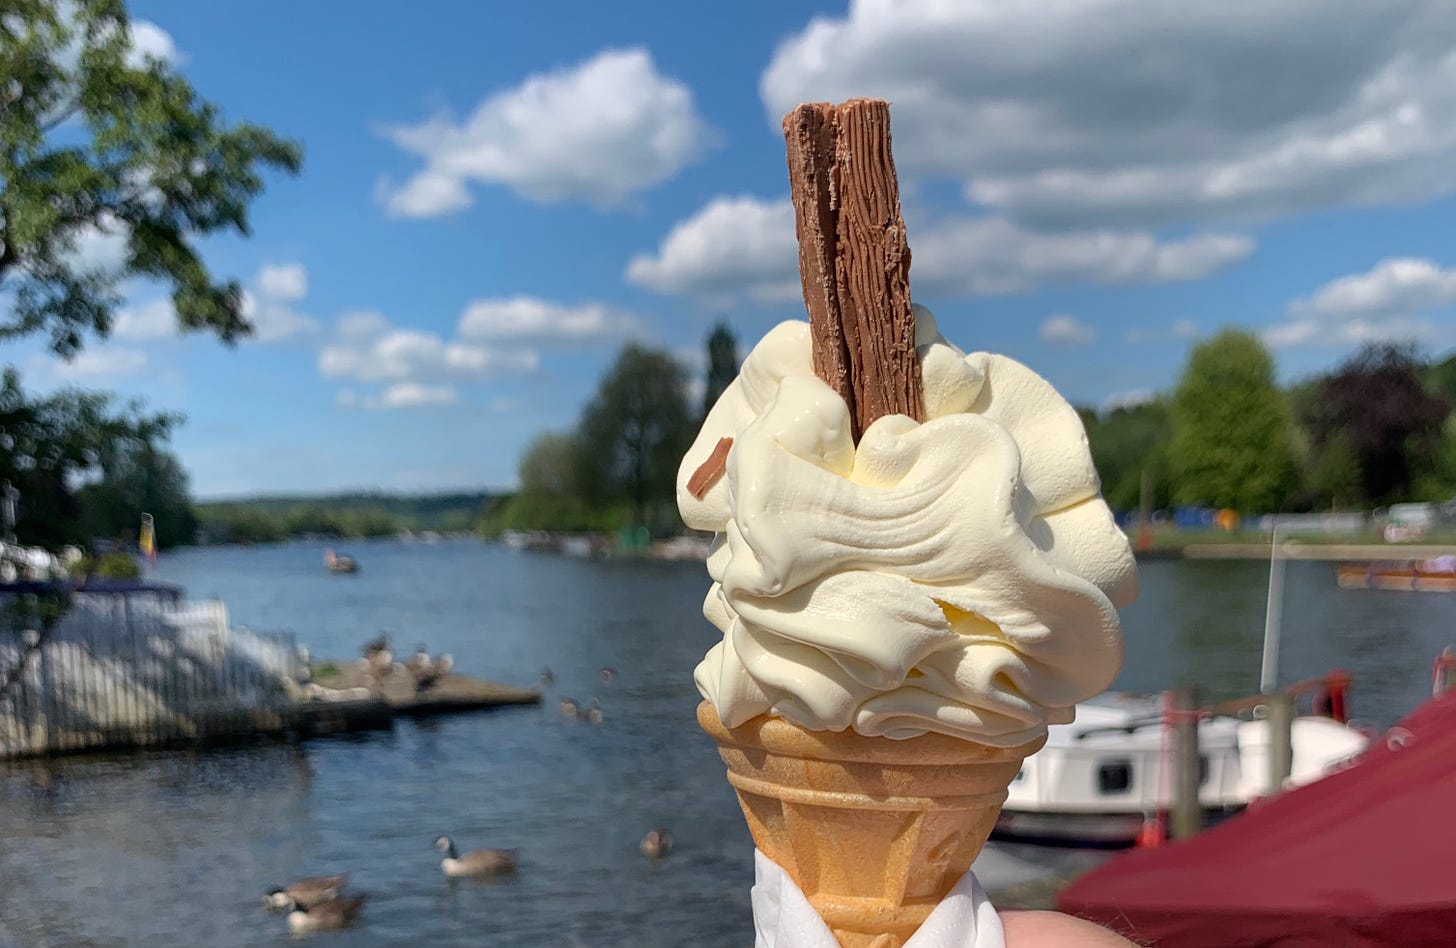 A retirement ice cream by the river